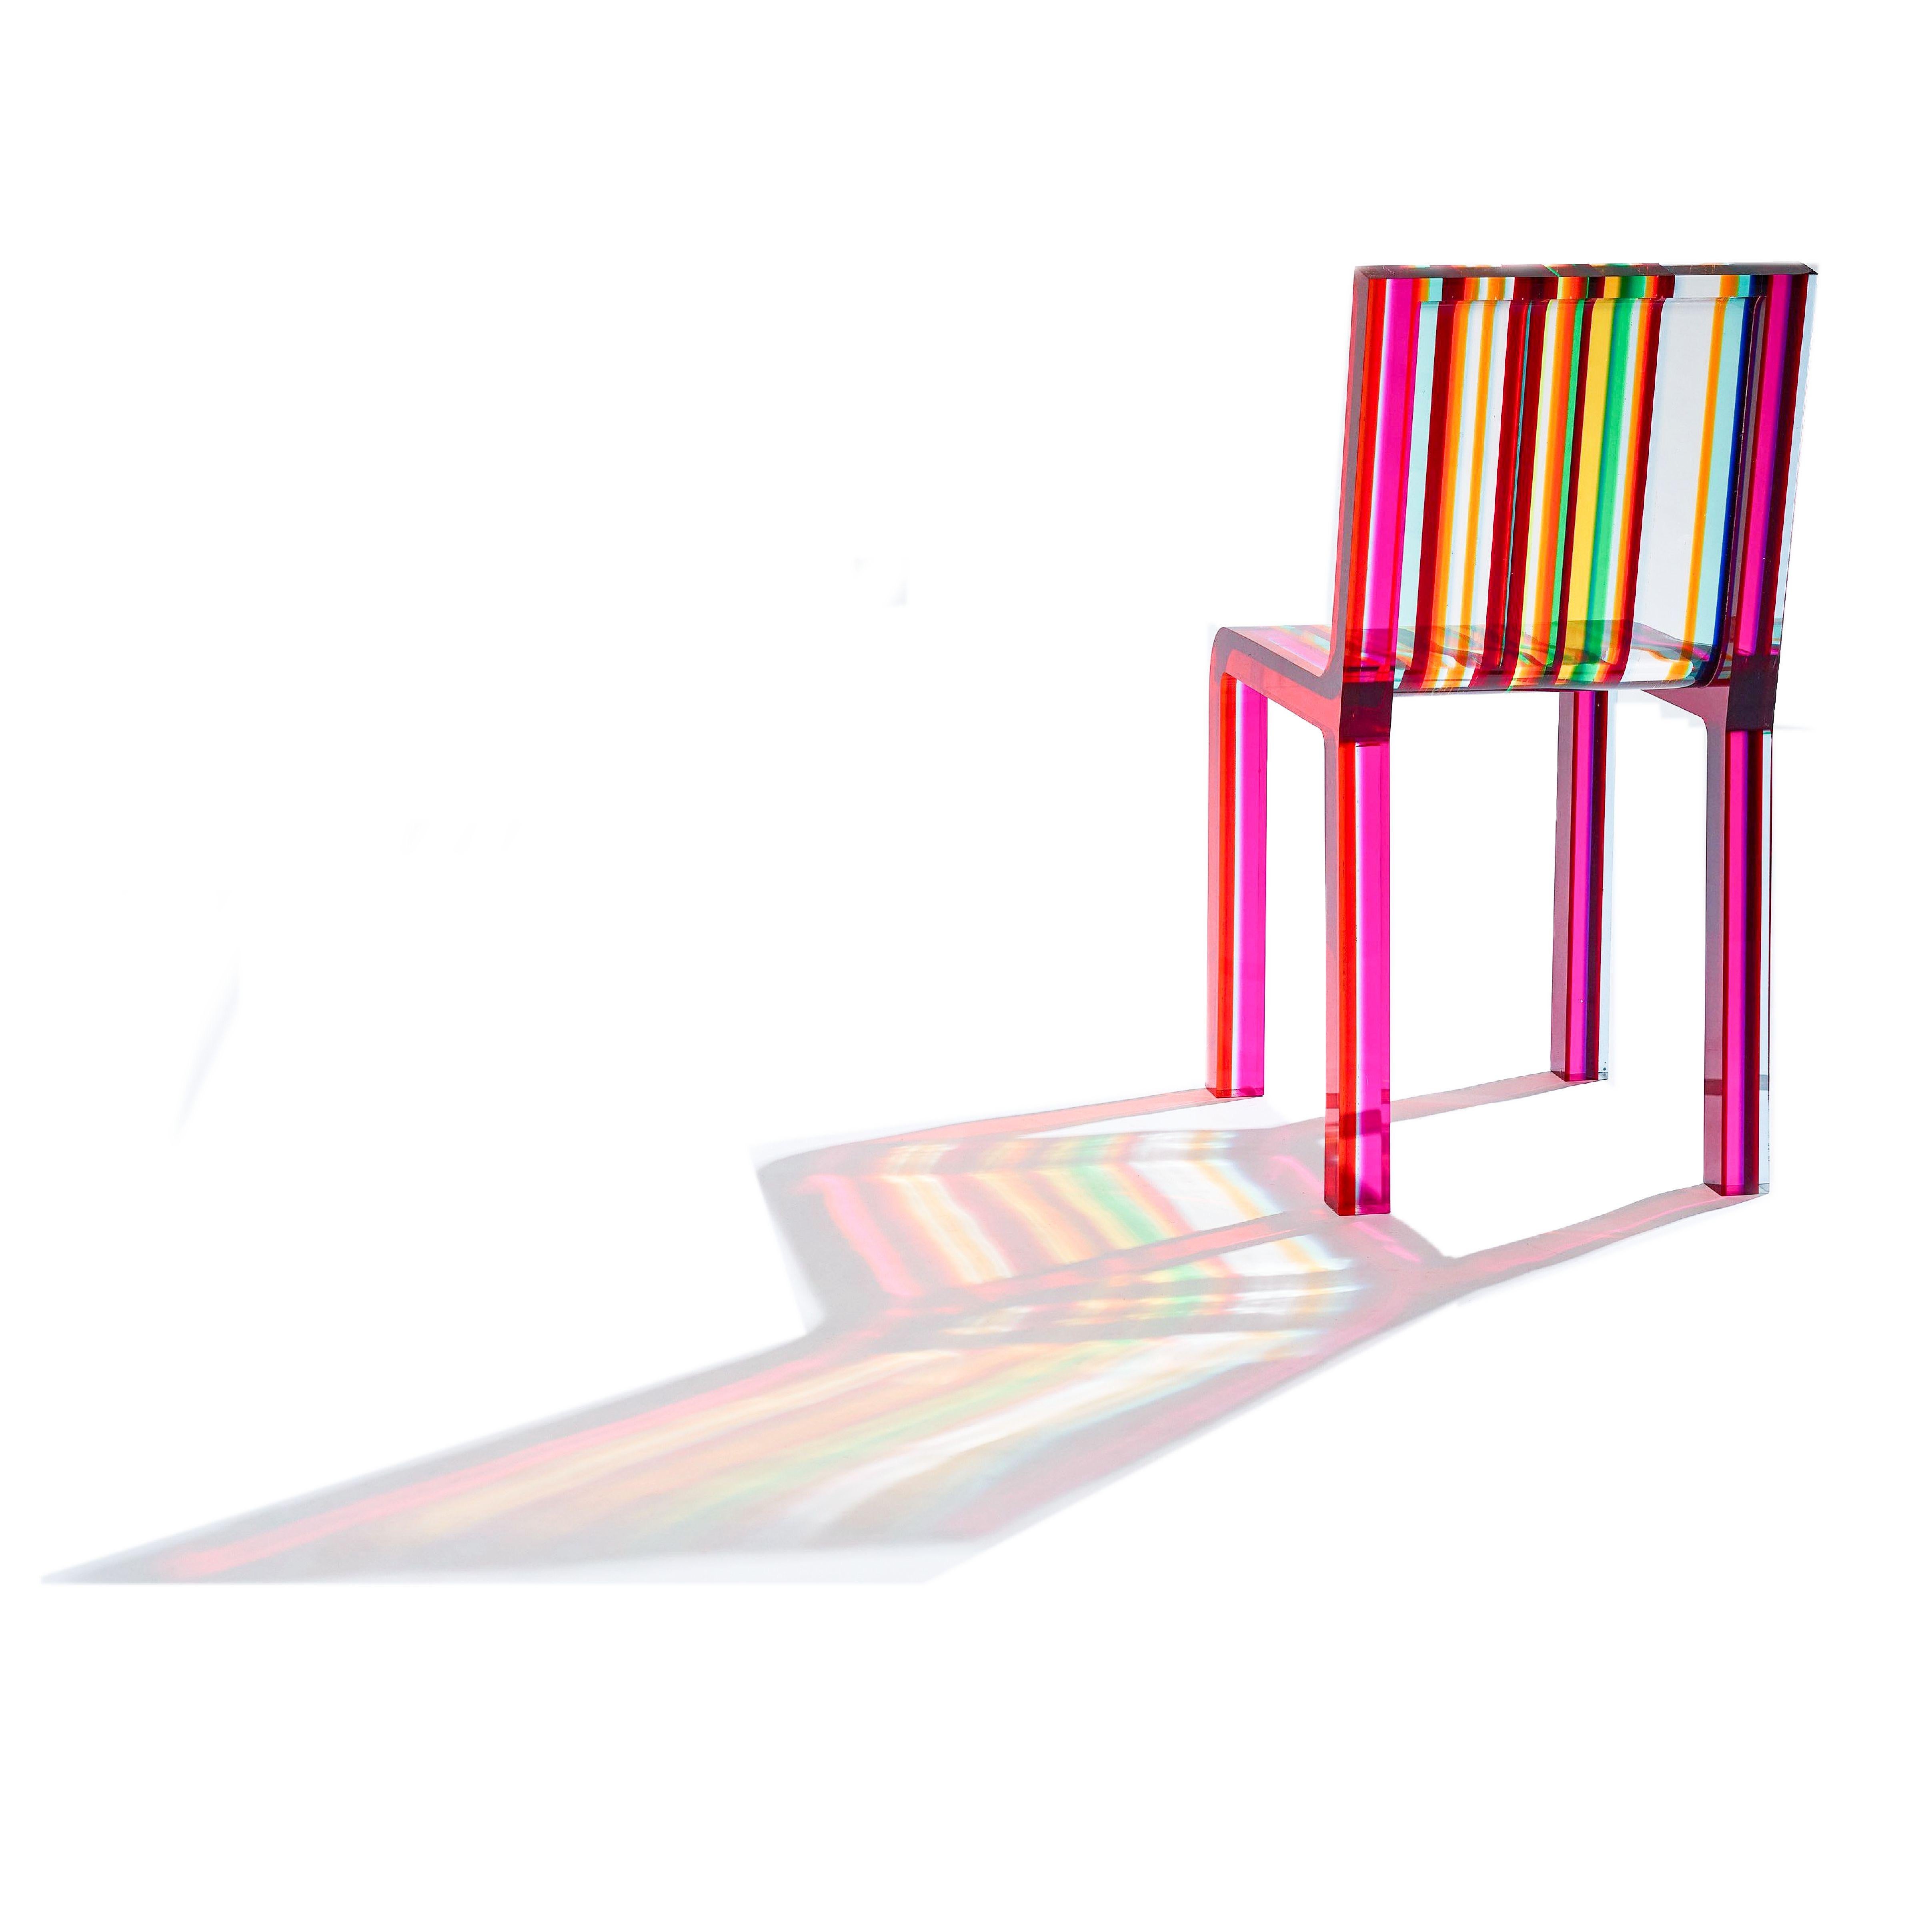 Contemporary Rainbow Chair by Patrick Norguet for Cappellini 2000 Multi-Color Lucite Acrylic For Sale